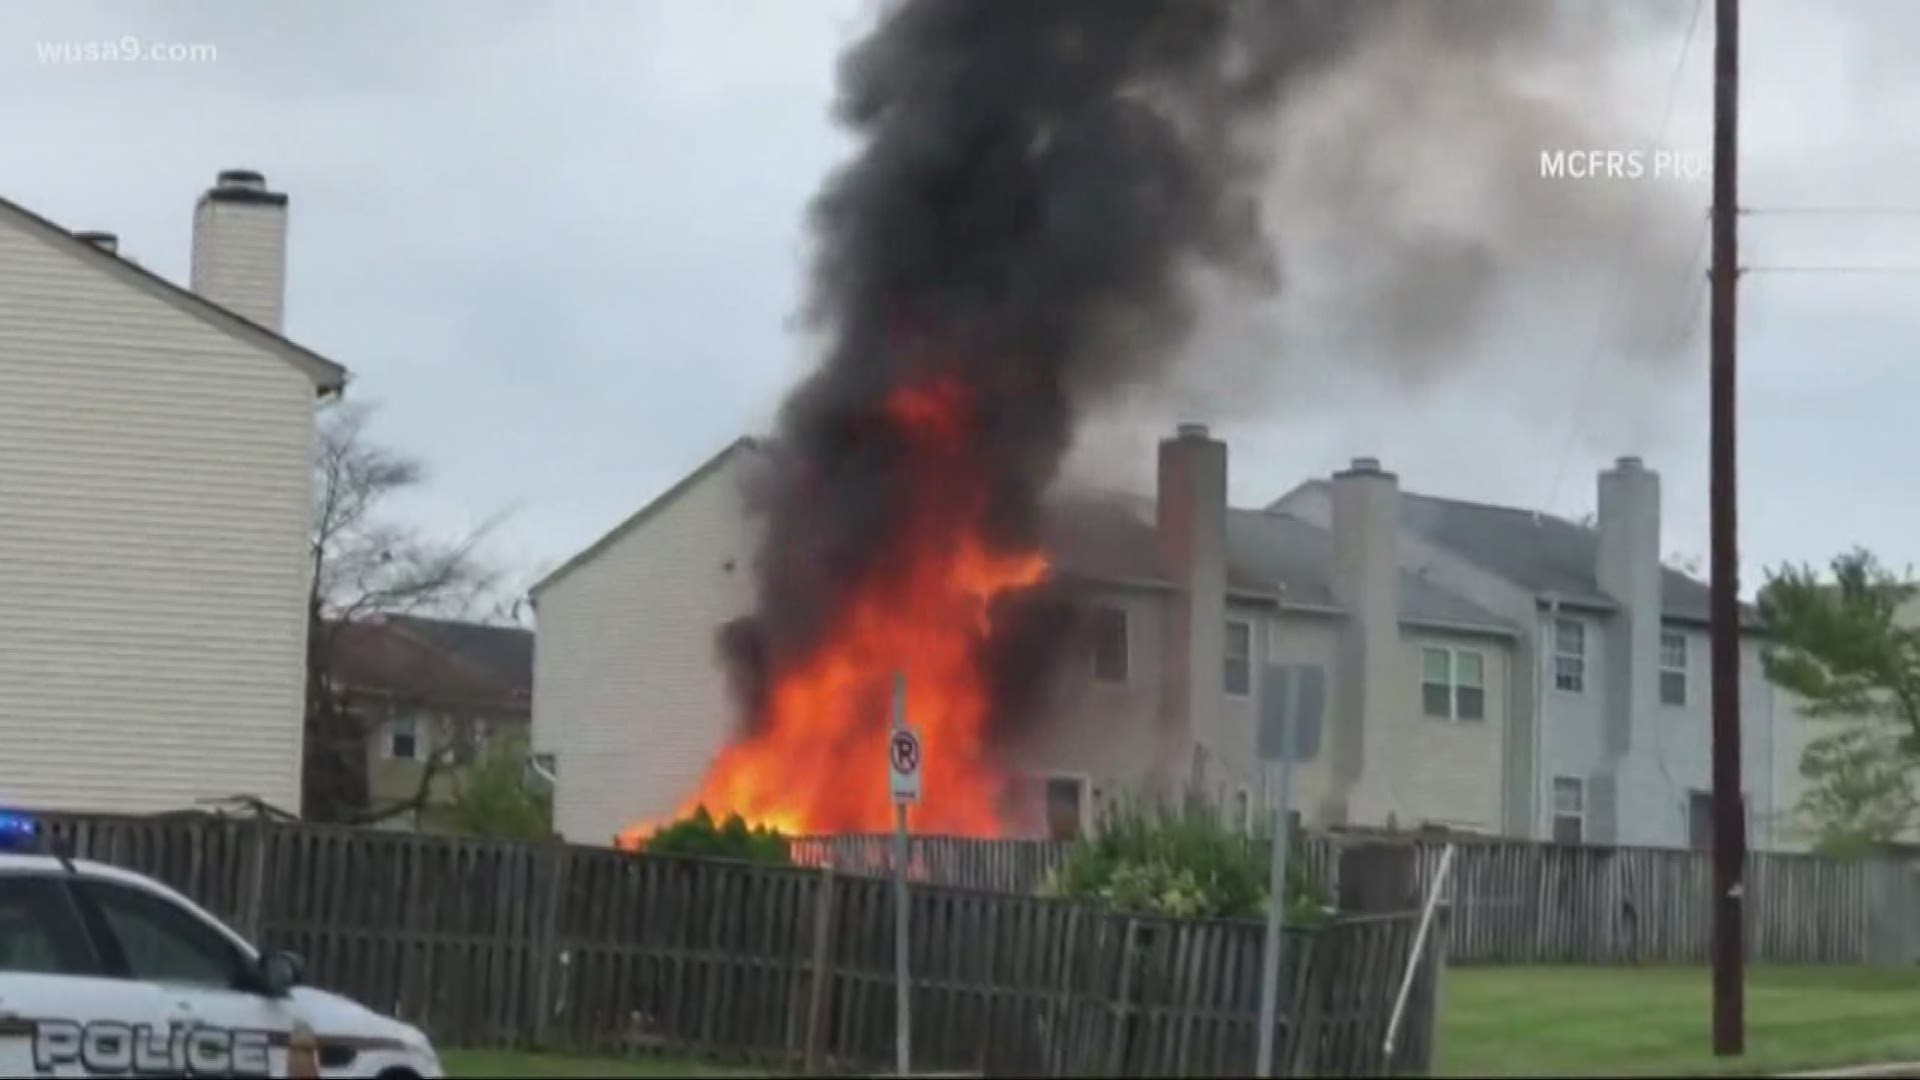 A family was displaced after a fire destroyed their home in Gaithersburg, Maryland.

Montgomery County fire crews responded to the fire at the two-story home in the 8600 block of Kelso Terrace around 4 p.m. Saturday. Officials say the fire appeared to have started on the outside of the home and extended inside and into the roof and attic area.